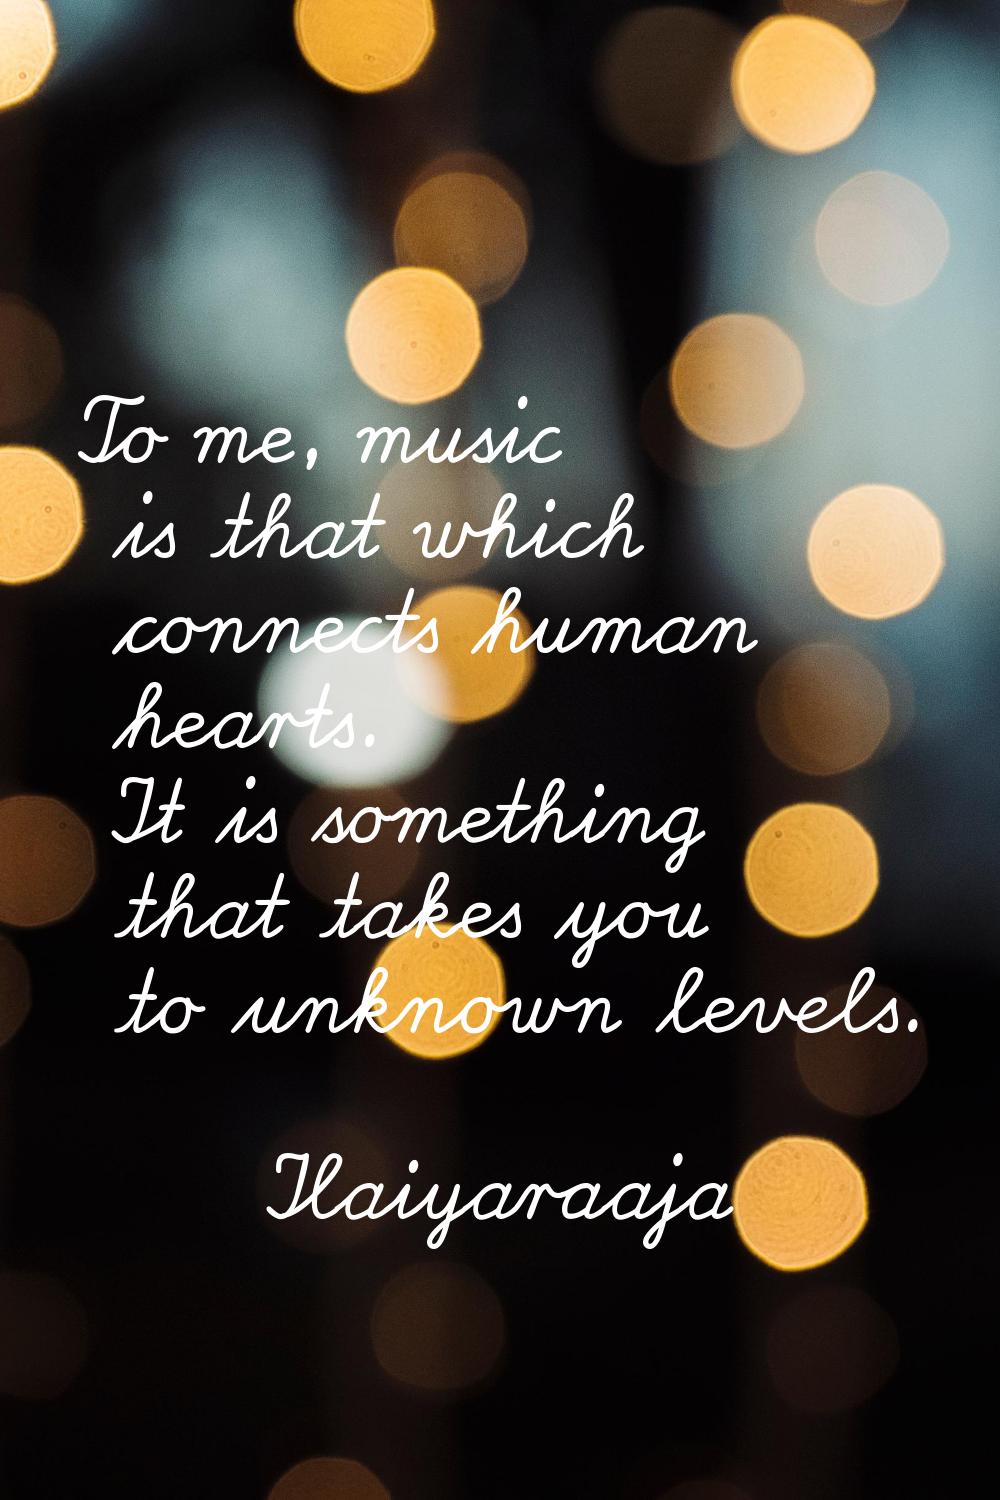 To me, music is that which connects human hearts. It is something that takes you to unknown levels.